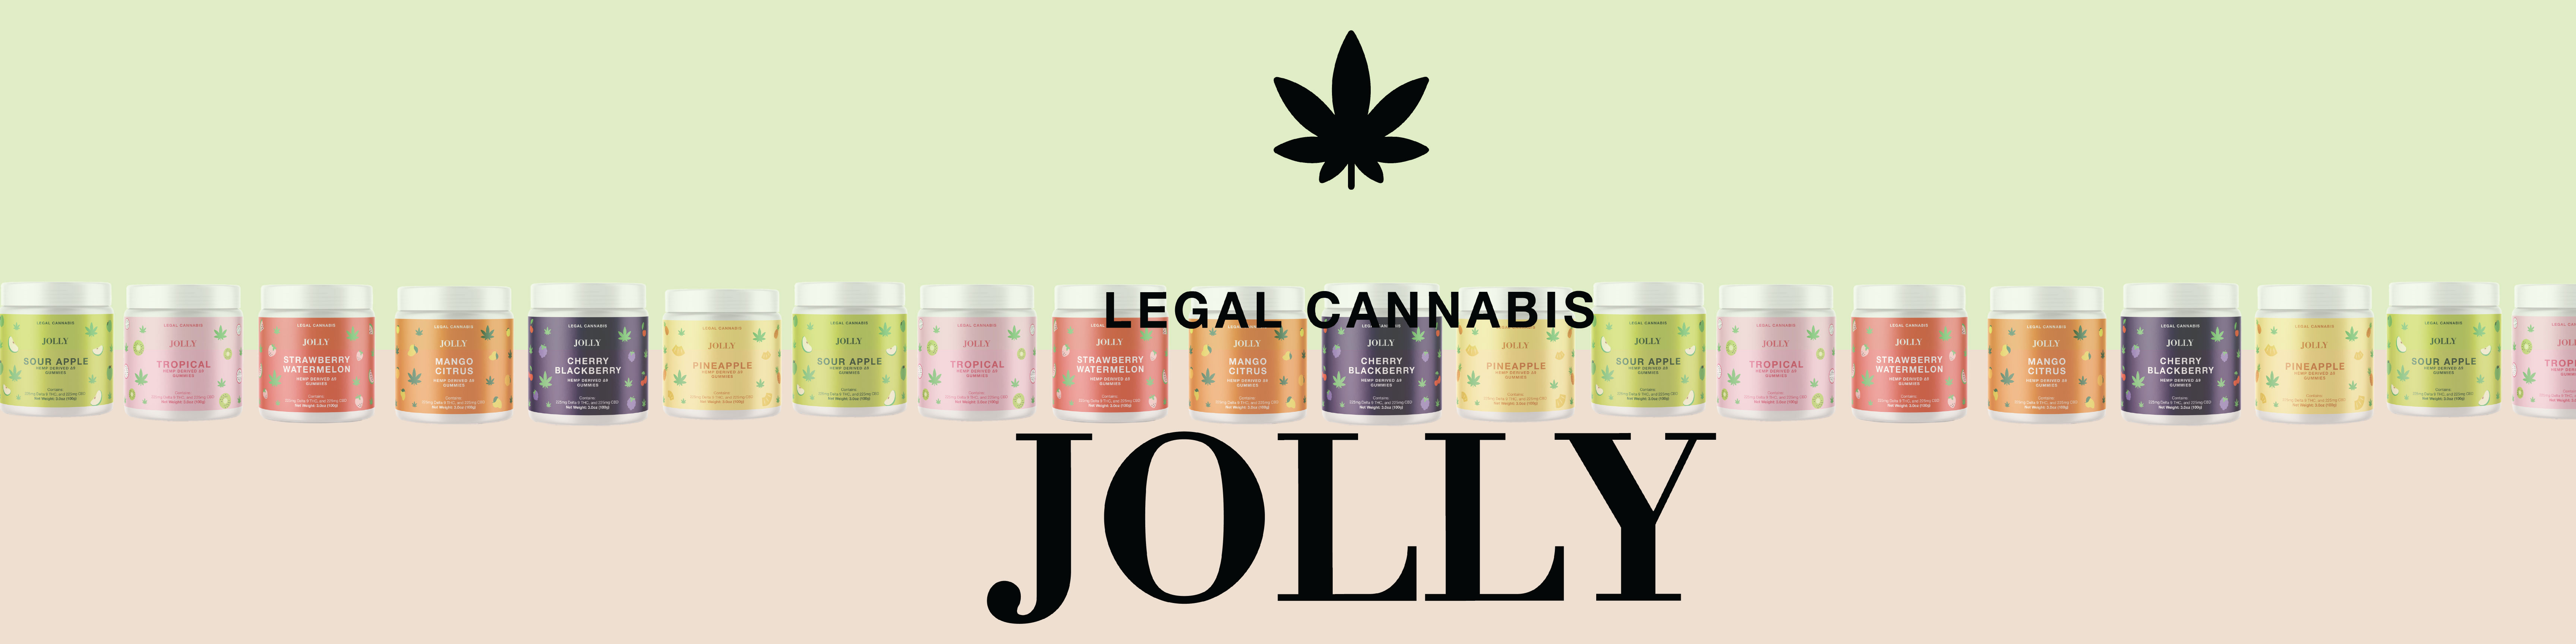 Jolly Legal Cannabis Unveils Their New Product Lines and Explains Their Quickly-Rising Brand